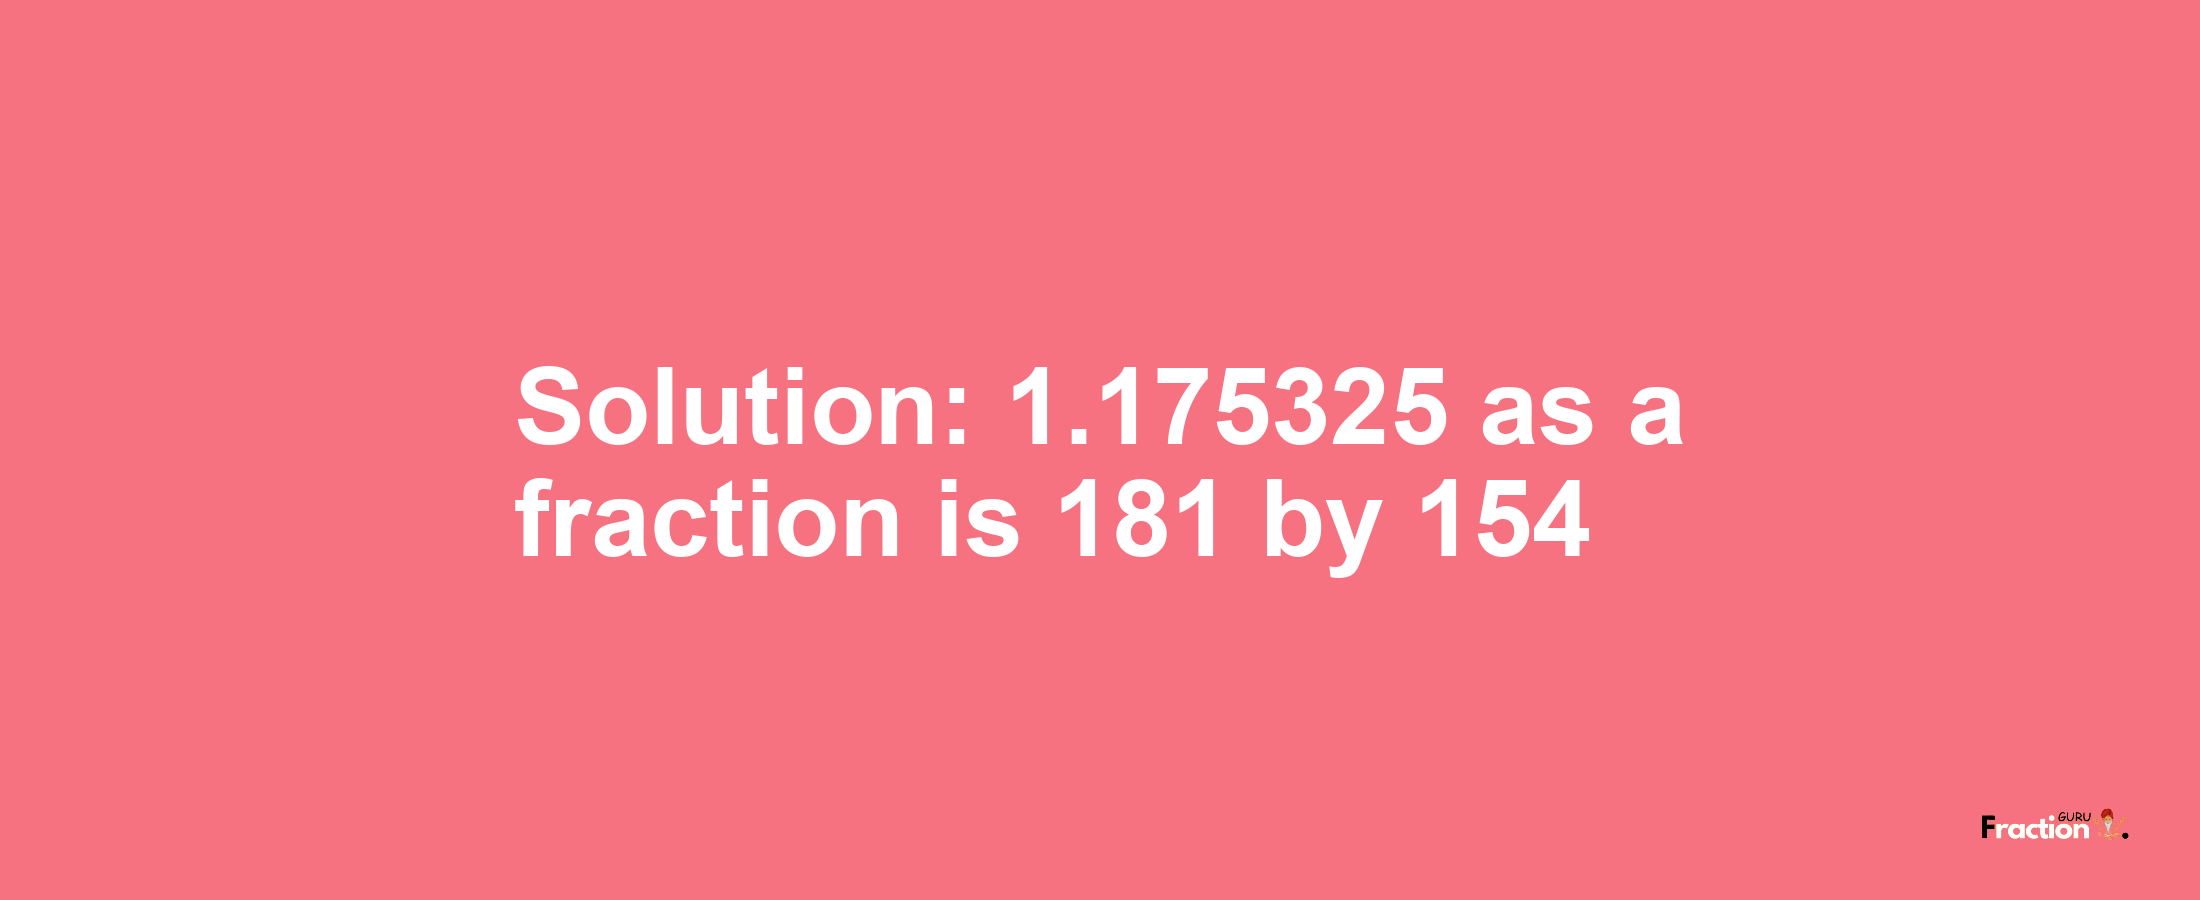 Solution:1.175325 as a fraction is 181/154